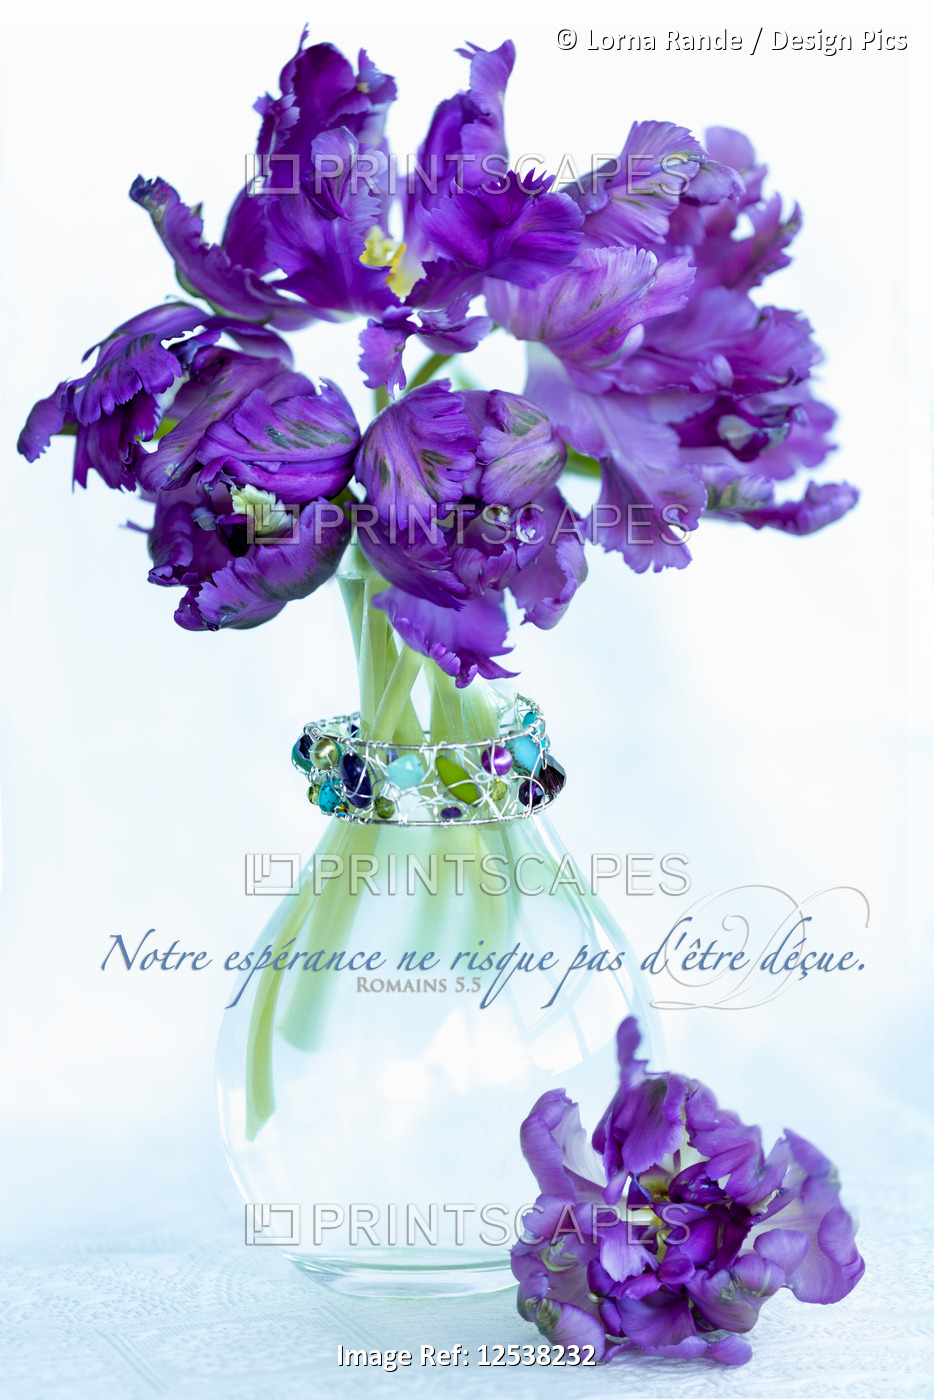 Purple tulips in a vase with Romans 5:5 scripture in French